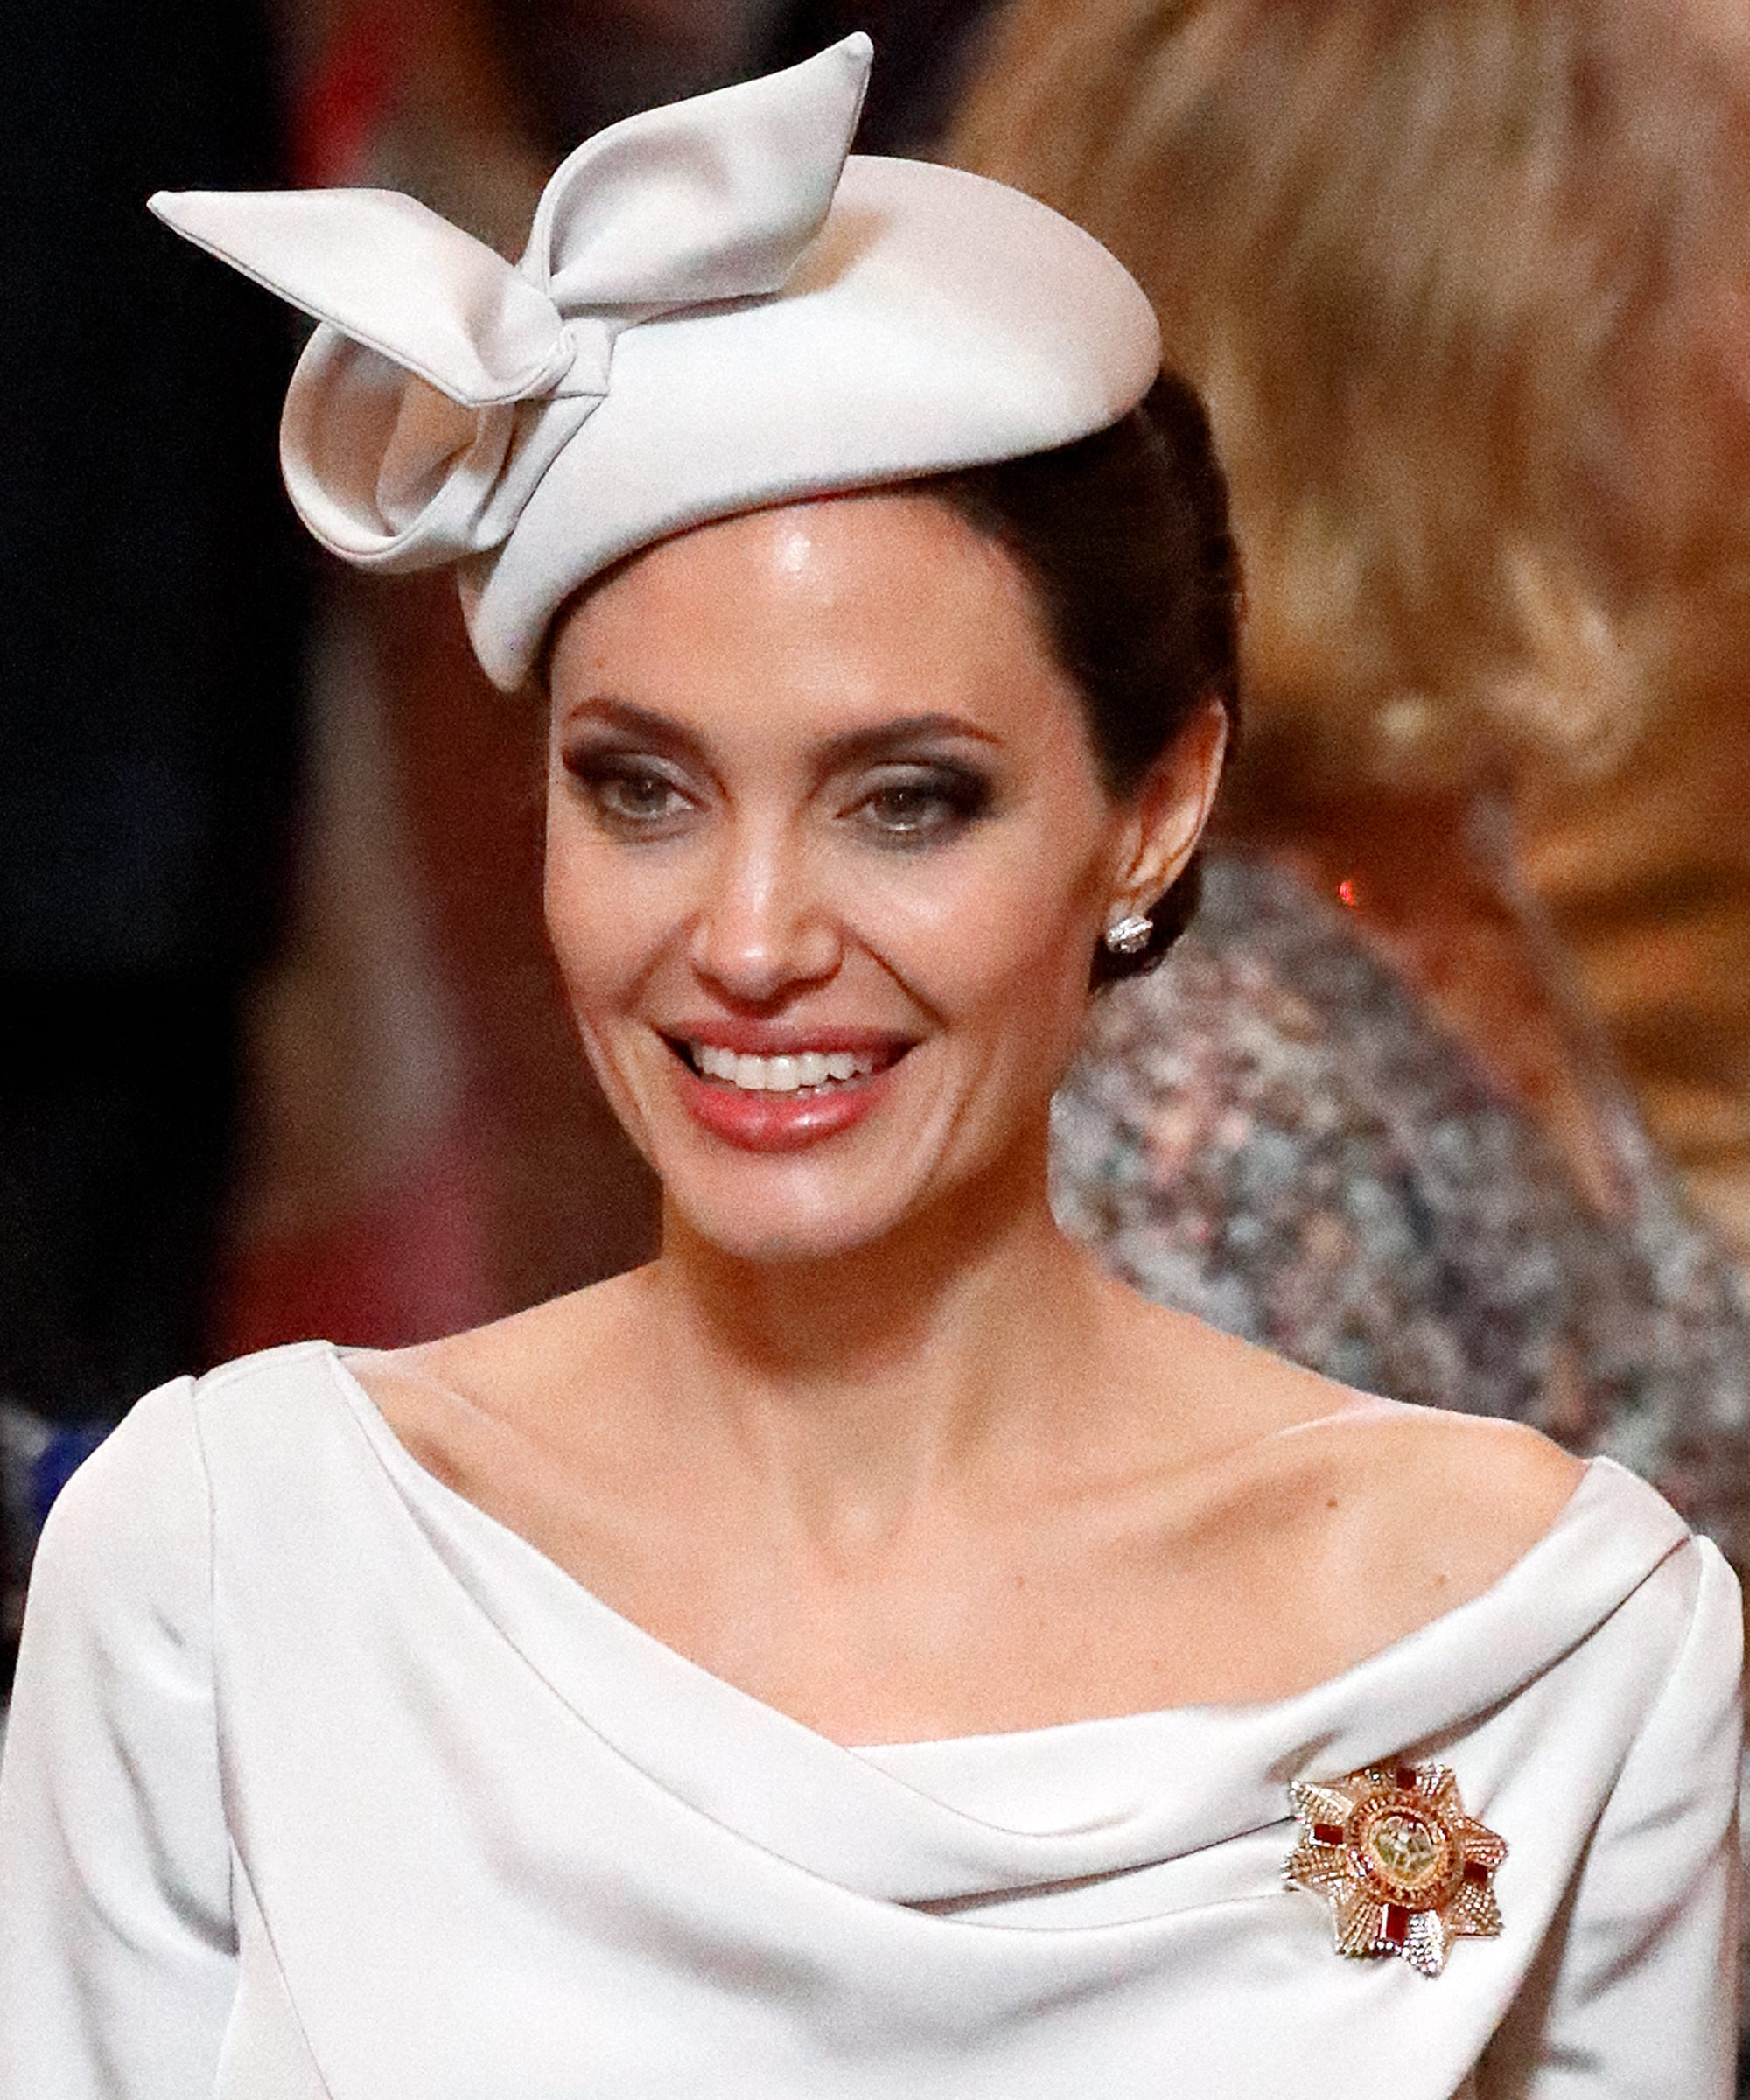 Angelina Jolie wearing a white dress and a white vintage hat